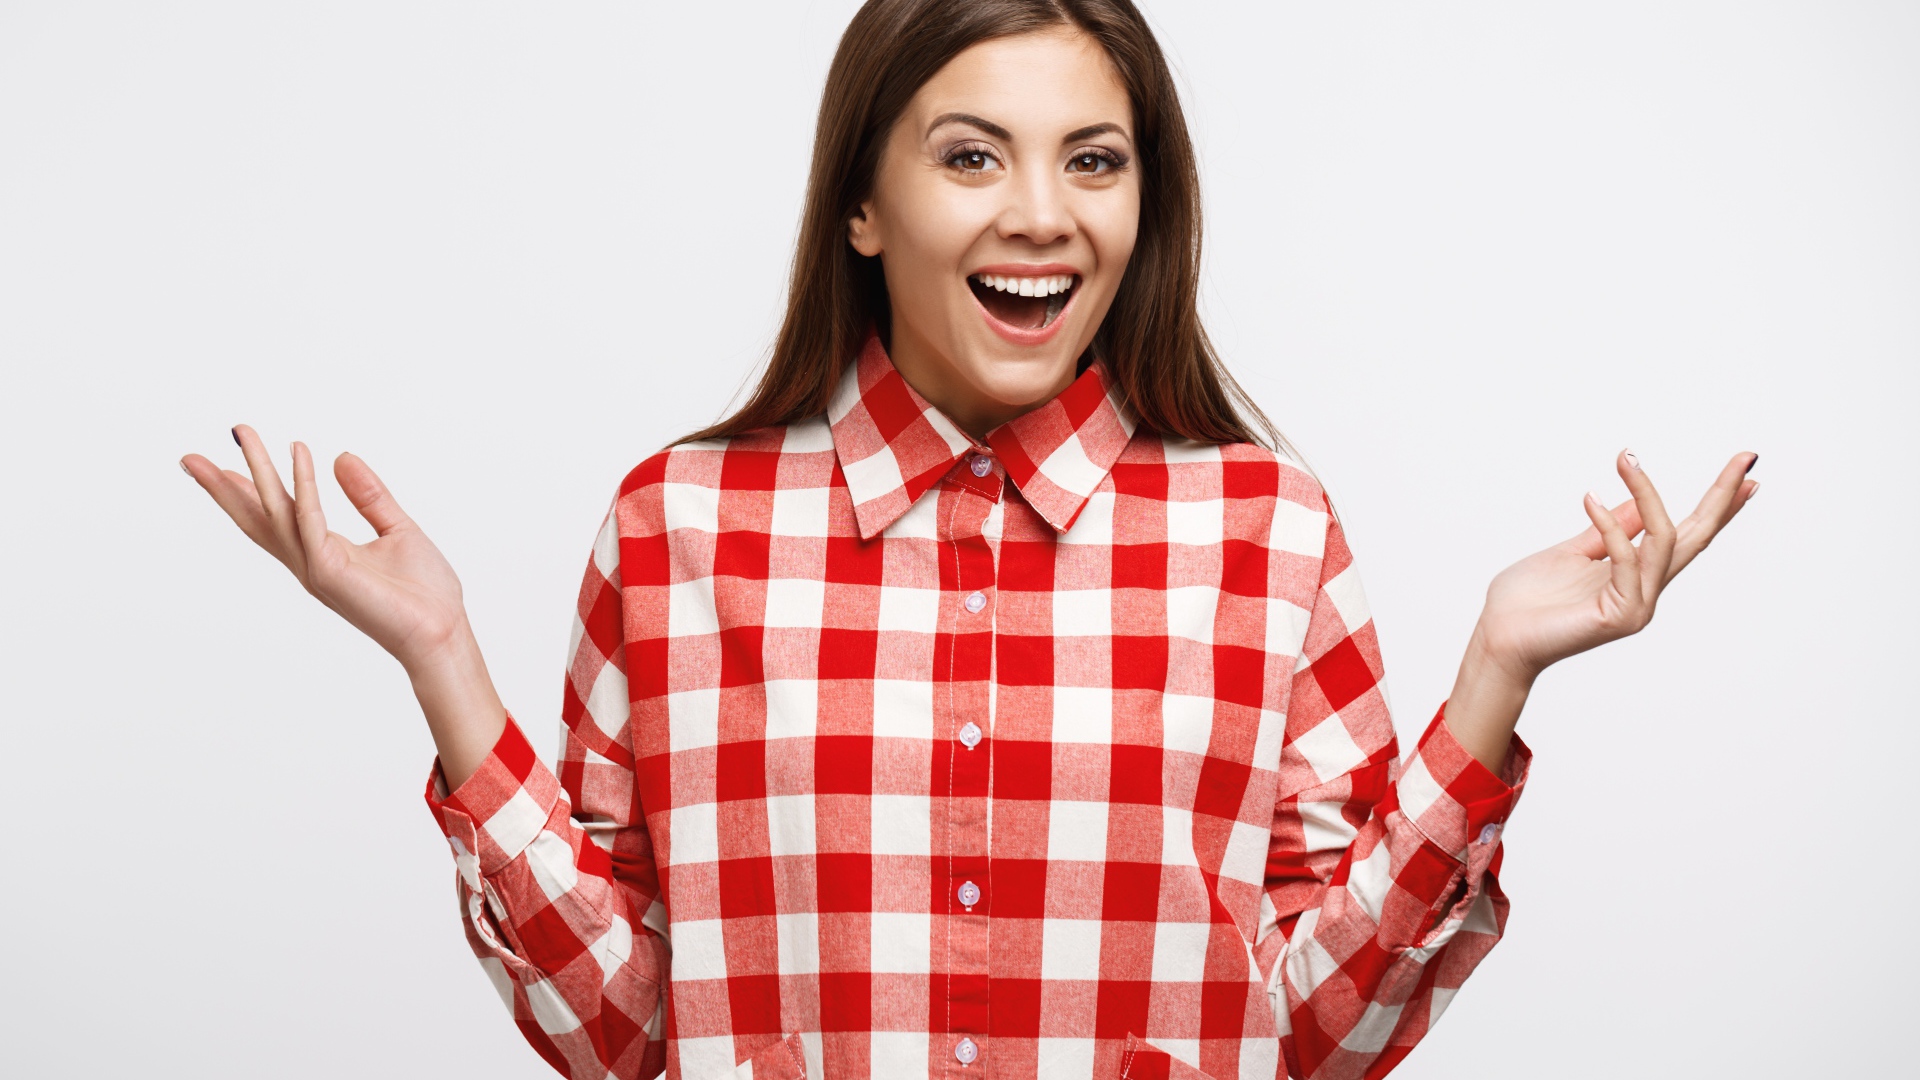 Cheerful girl in a plaid shirt on a white background